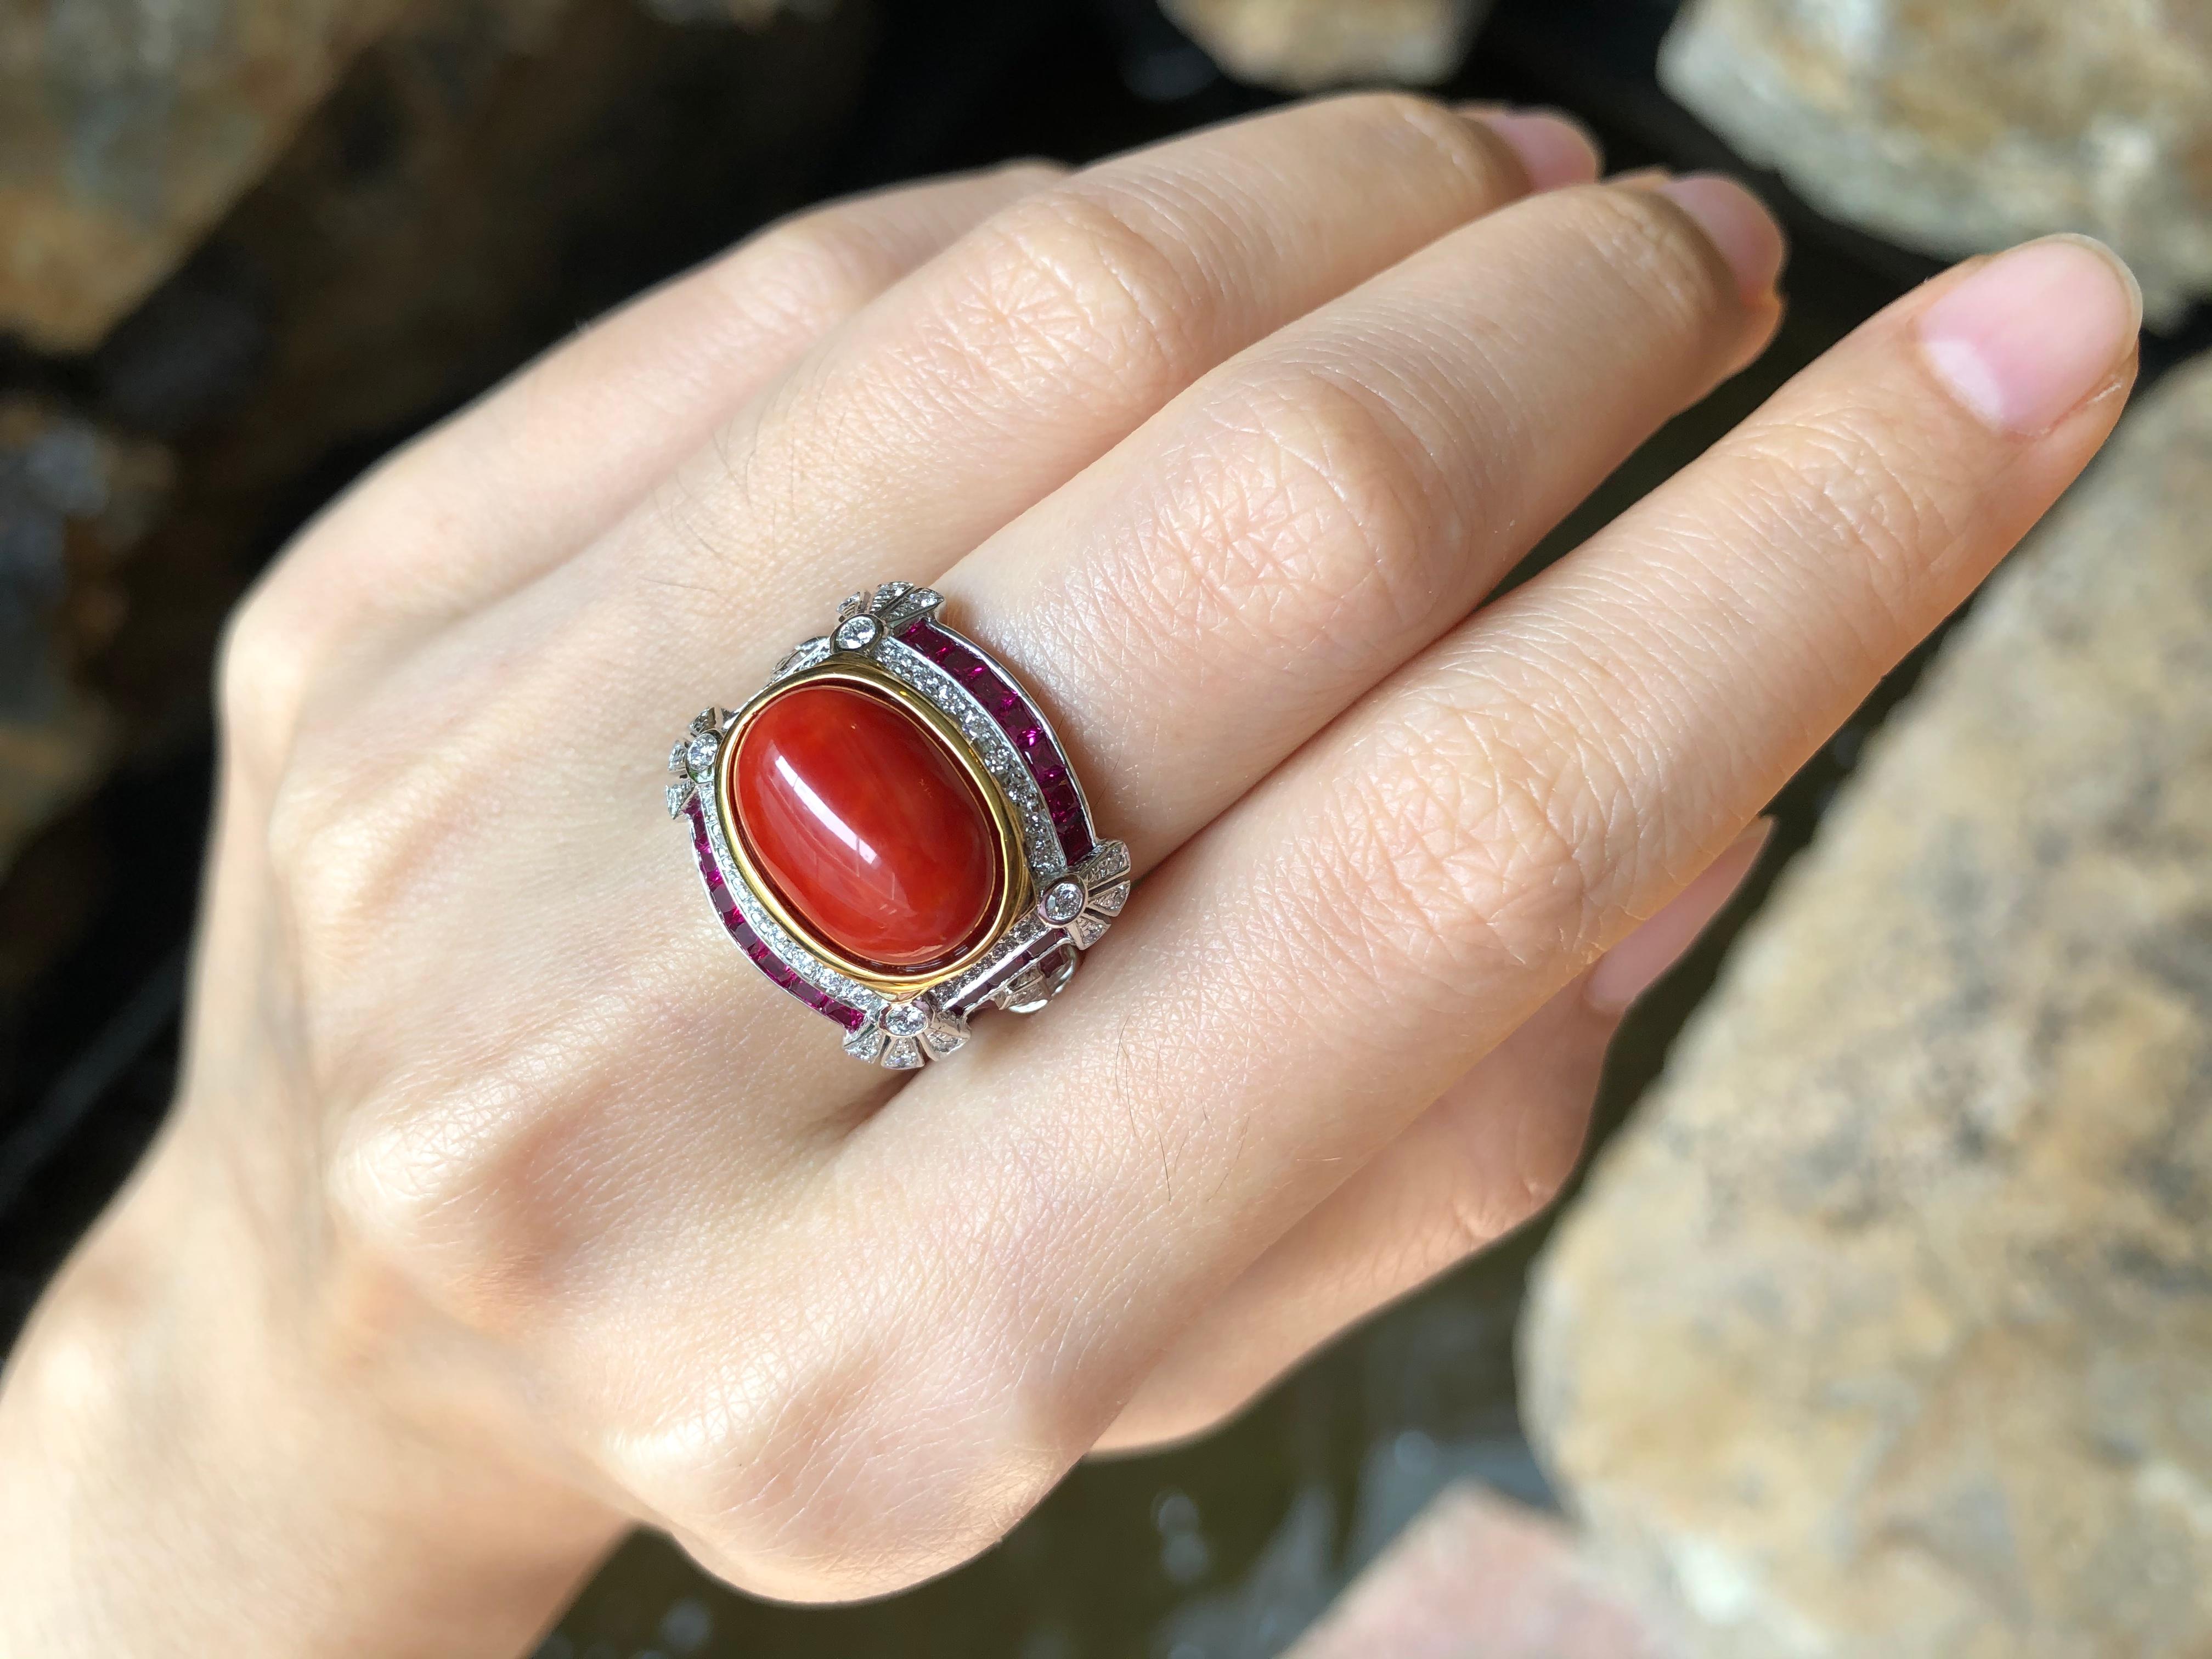 Coral 5.95 carats with Ruby 1.78 carats and Diamond 0.45 carat Ring set in 18 Karat White Gold Settings

Width:  1.3 cm 
Length: 1.0 cm
Ring Size: 53
Total Weight: 9.89 grams

